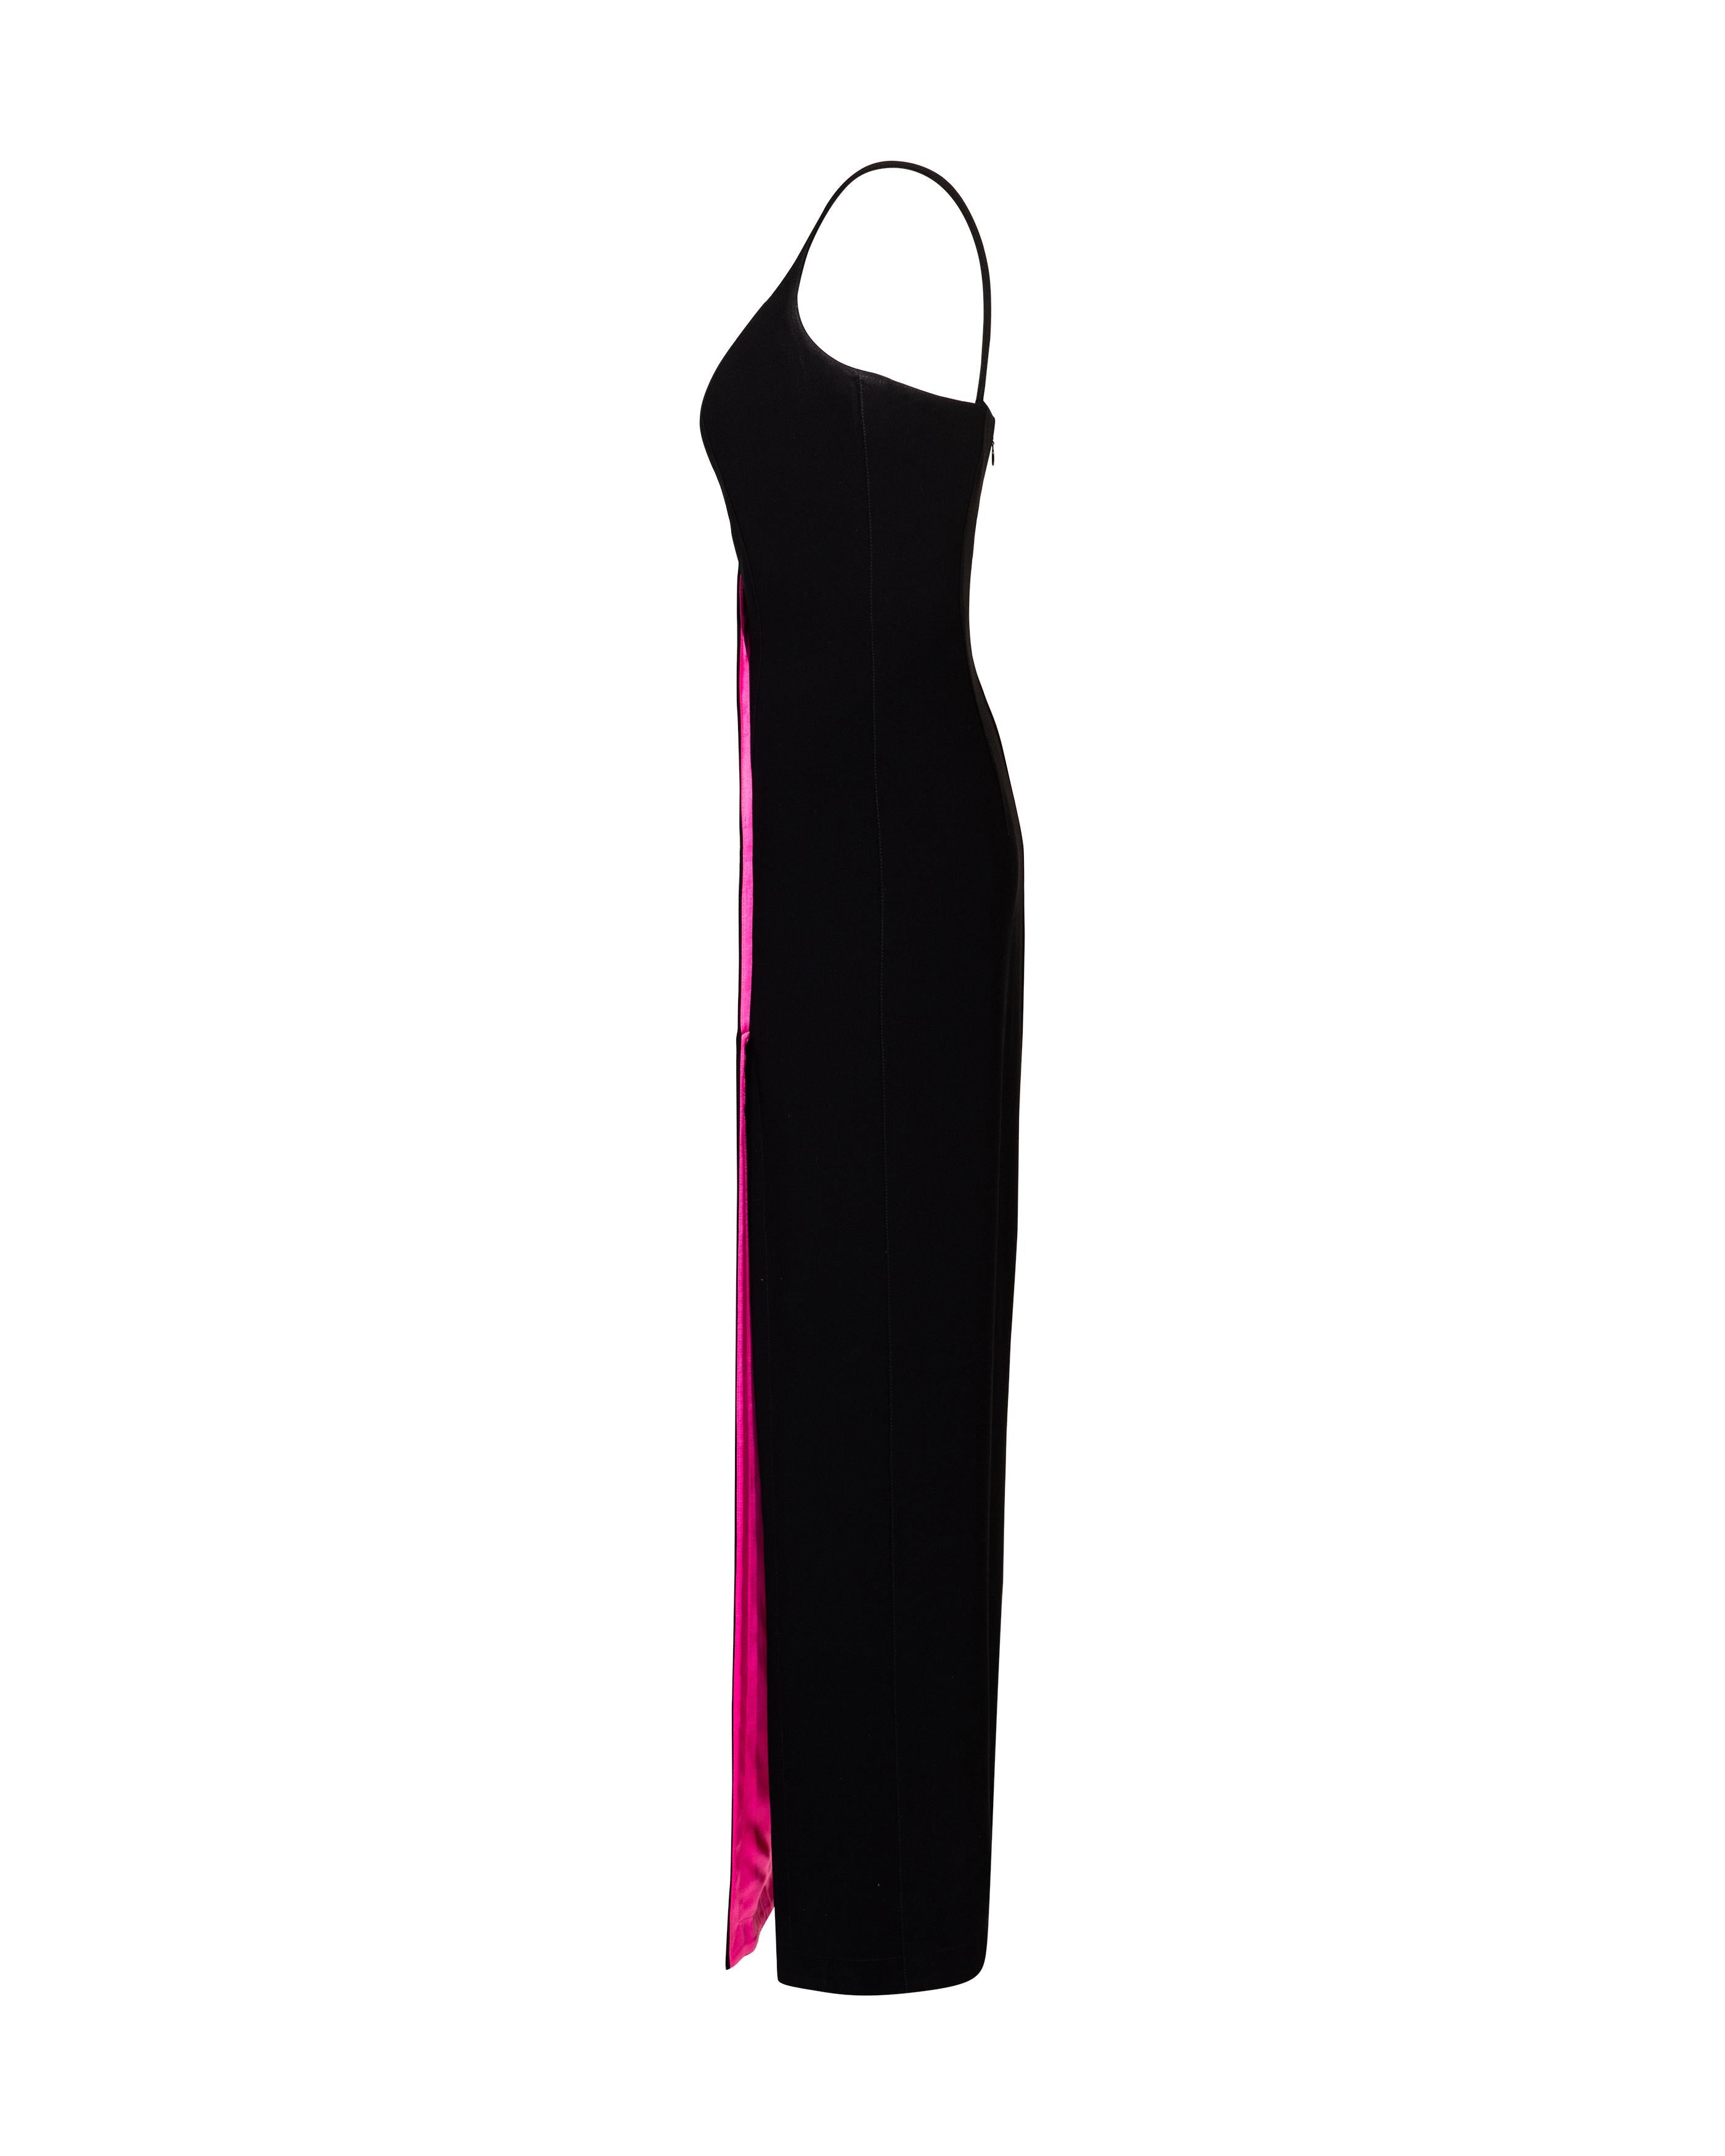 Women's A/W 1999 Thierry Mugler 'Vie en Rose' Collection Black and Pink Gown